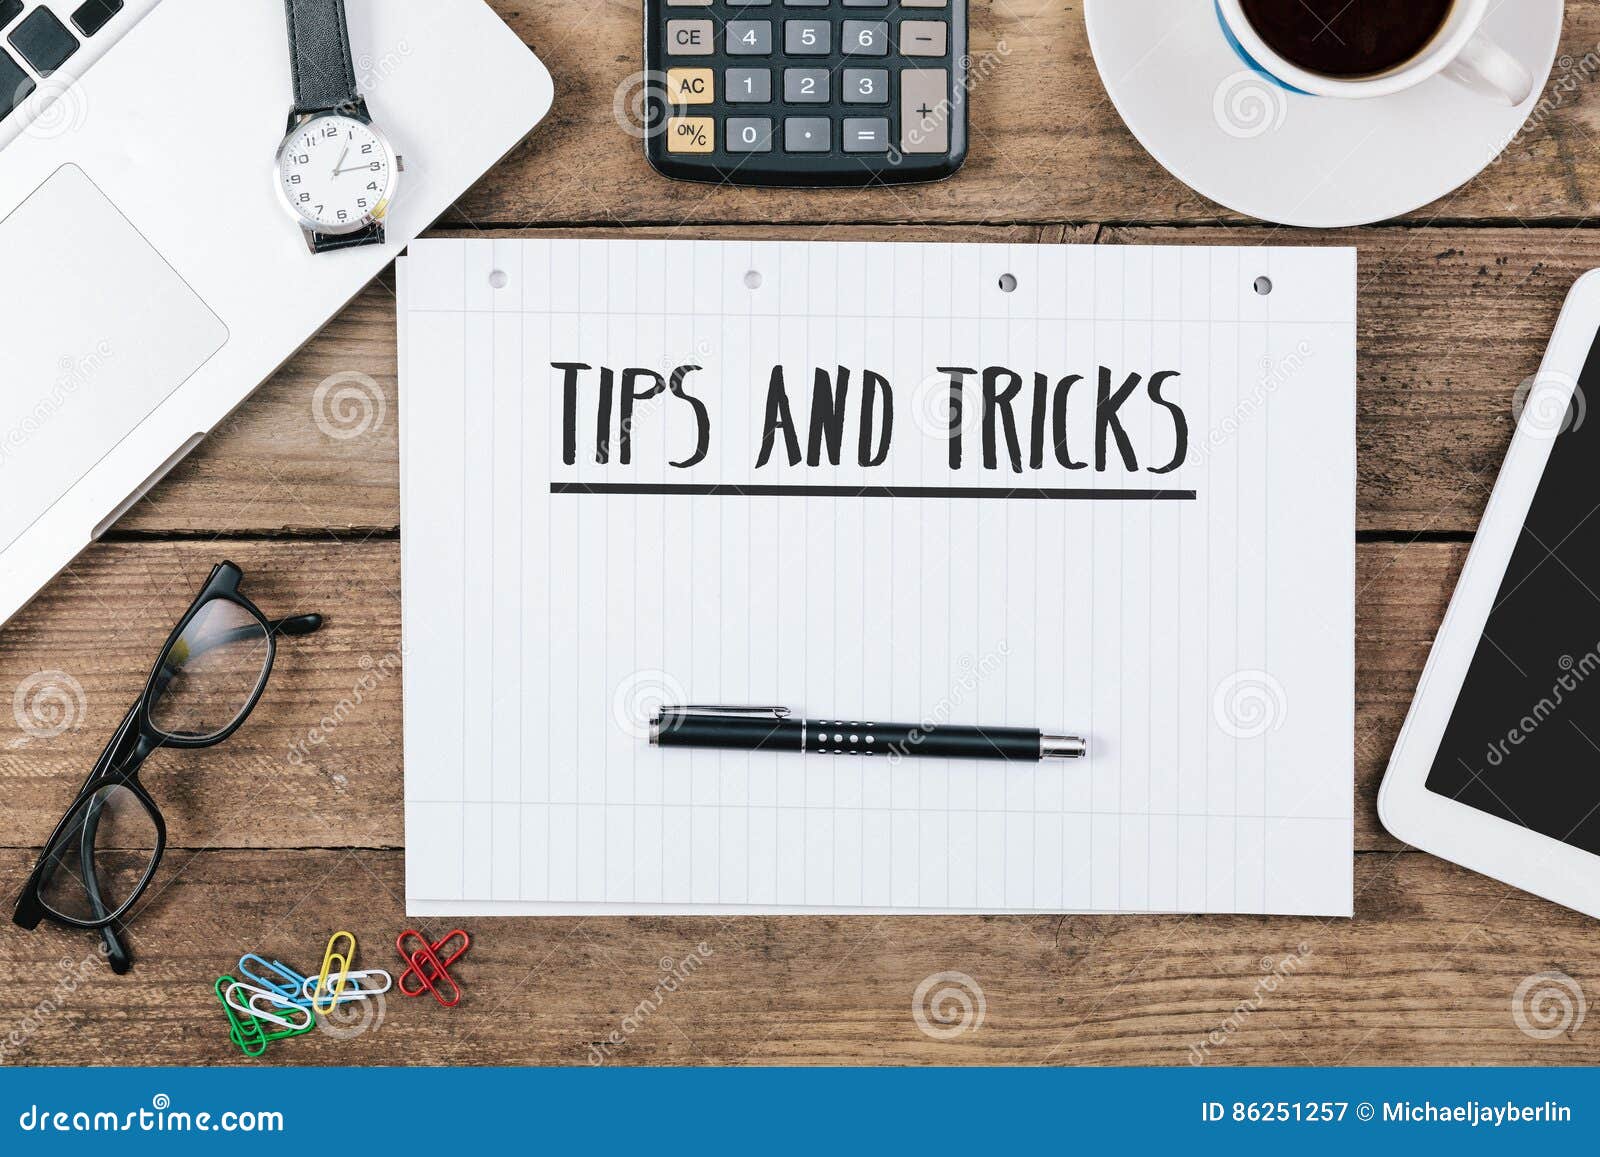 tips, tricks on notebook on office desk with computer technology